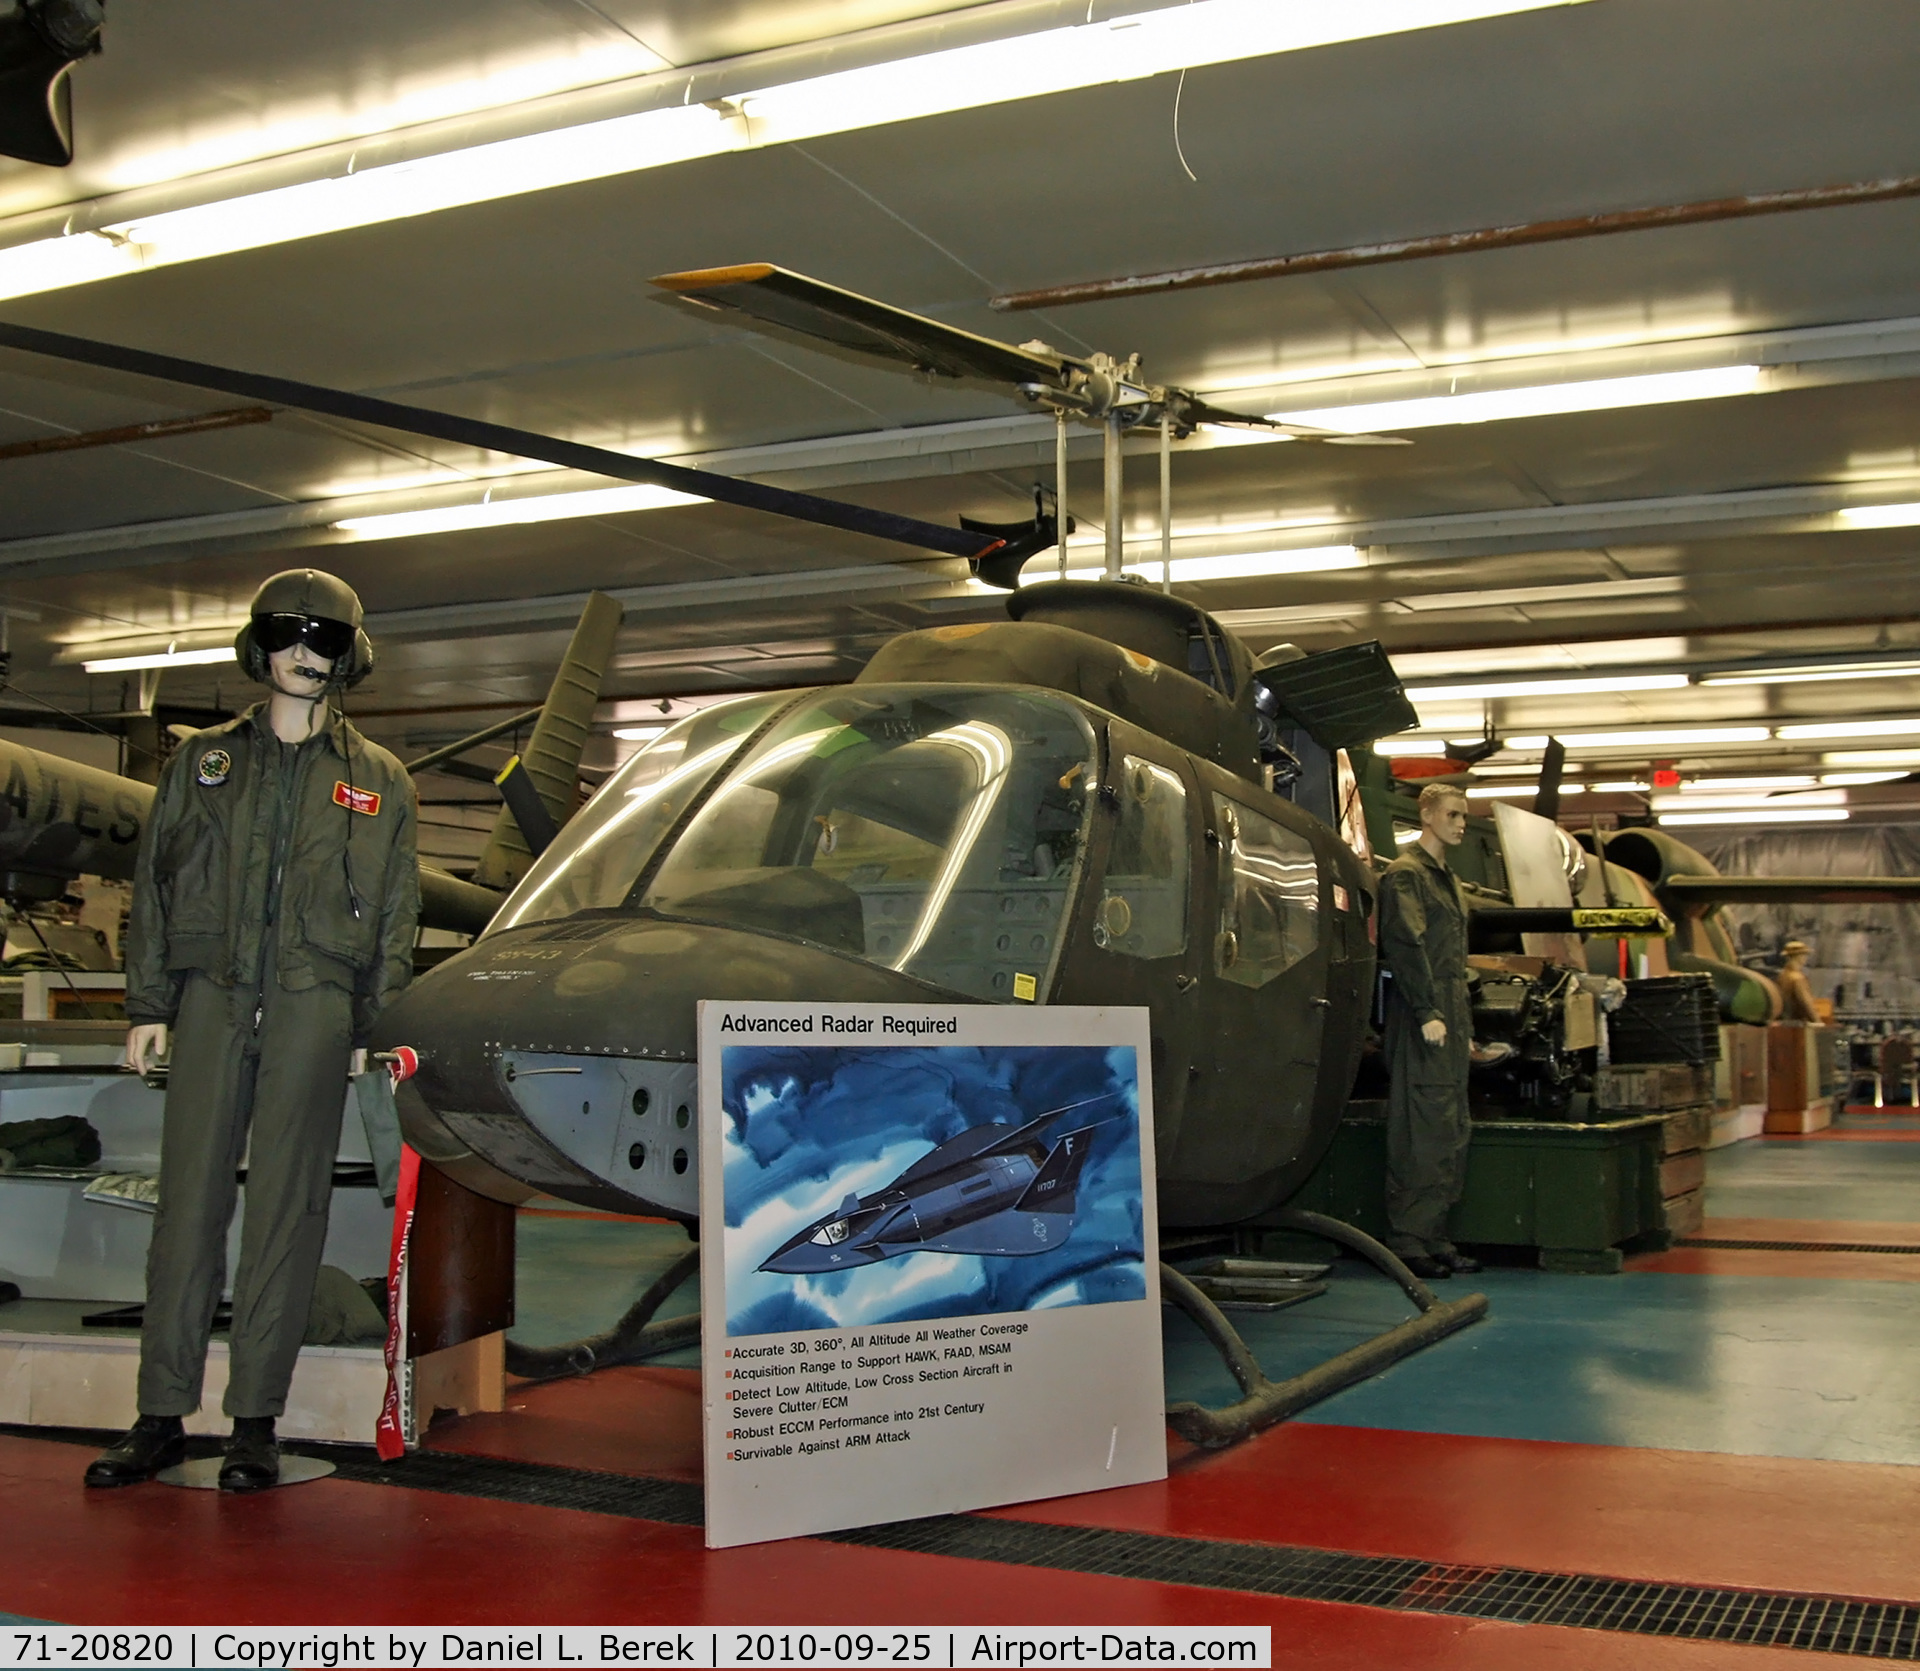 71-20820, 1971 Bell OH-58A Kiowa C/N 41681, On display in the main building of the Russell Military Museum.